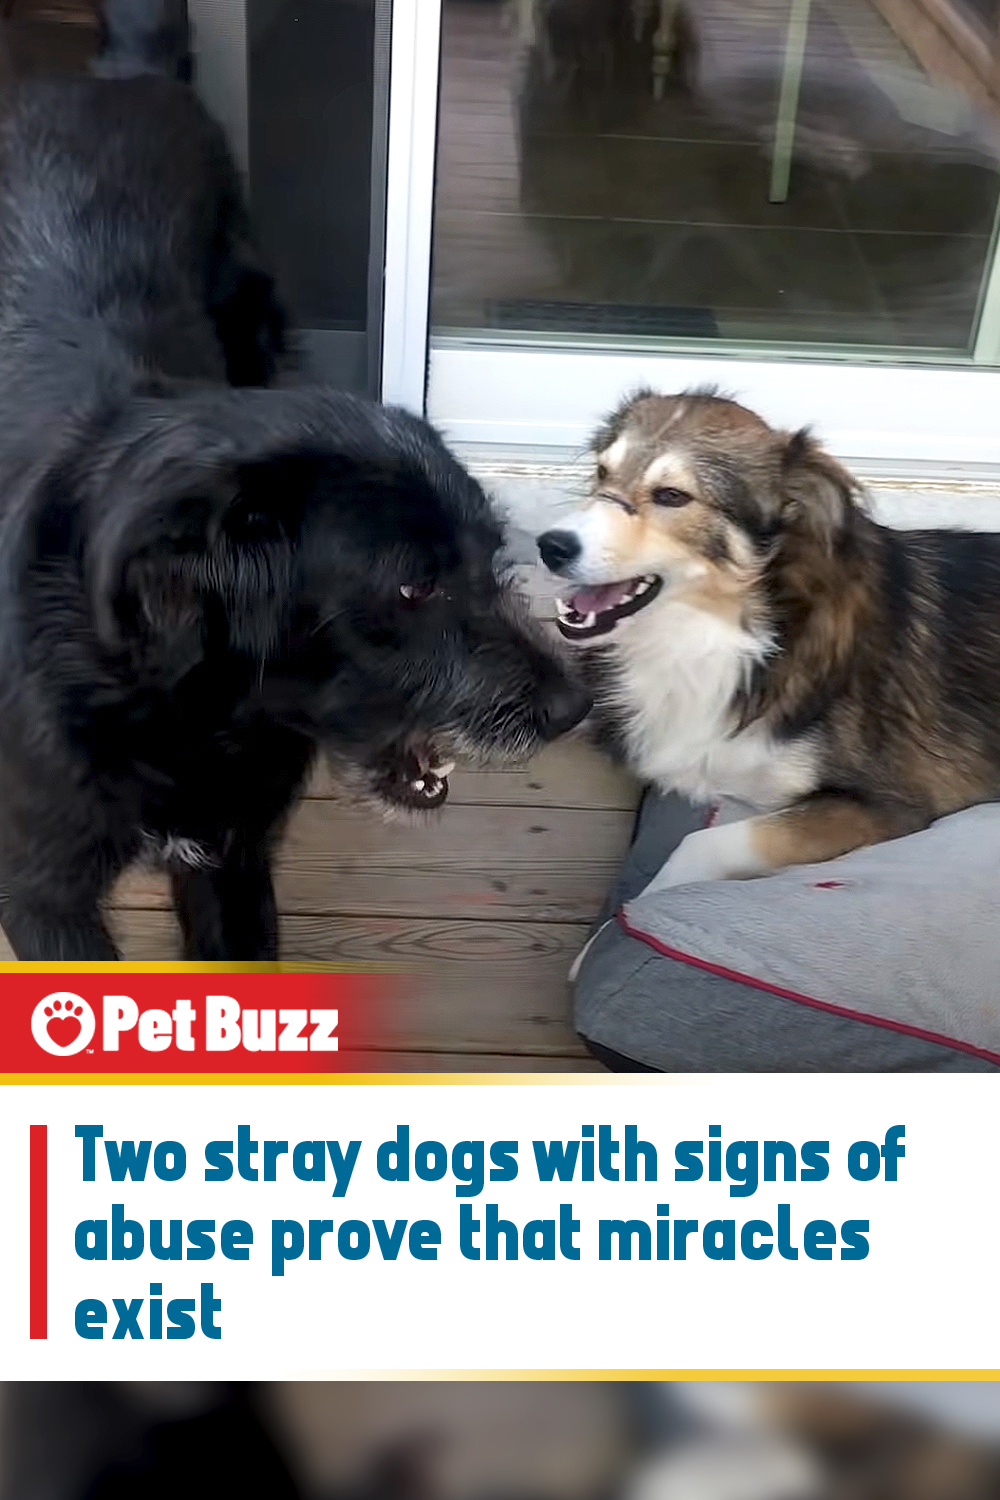 Two stray dogs with signs of abuse prove that miracles exist